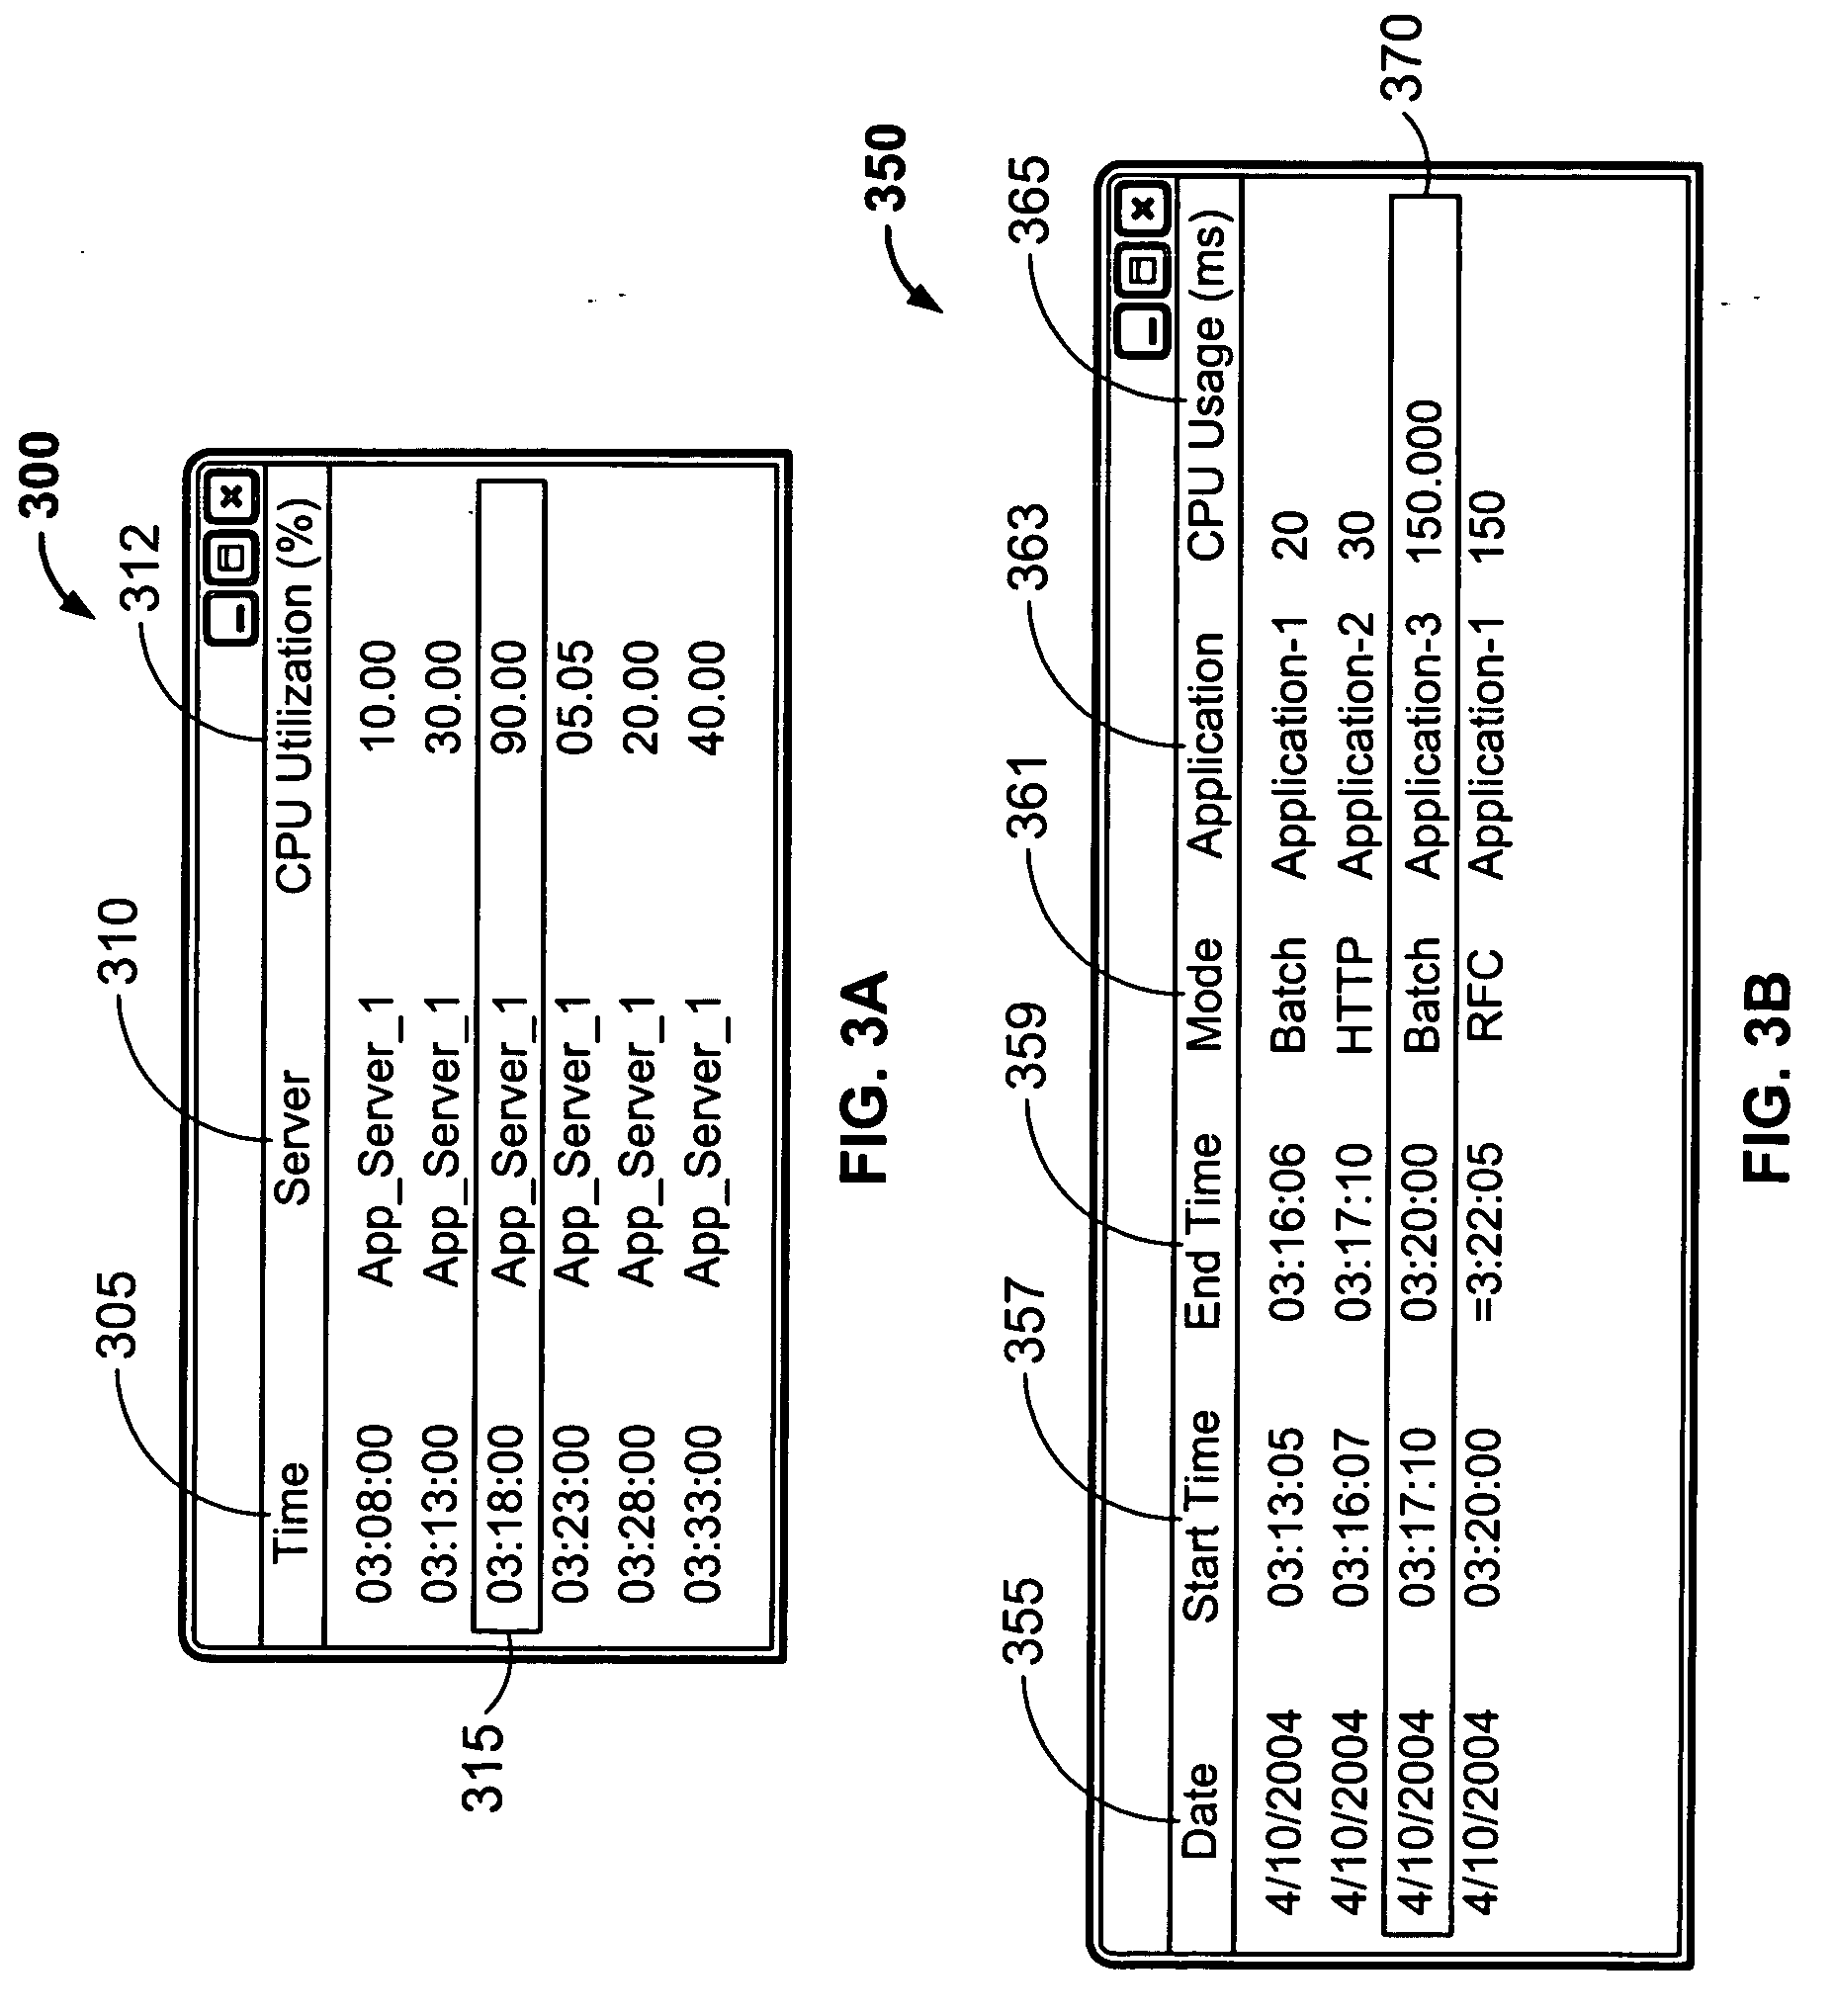 Combined analysis of statistical and performance data in a computer based enterprise application environment